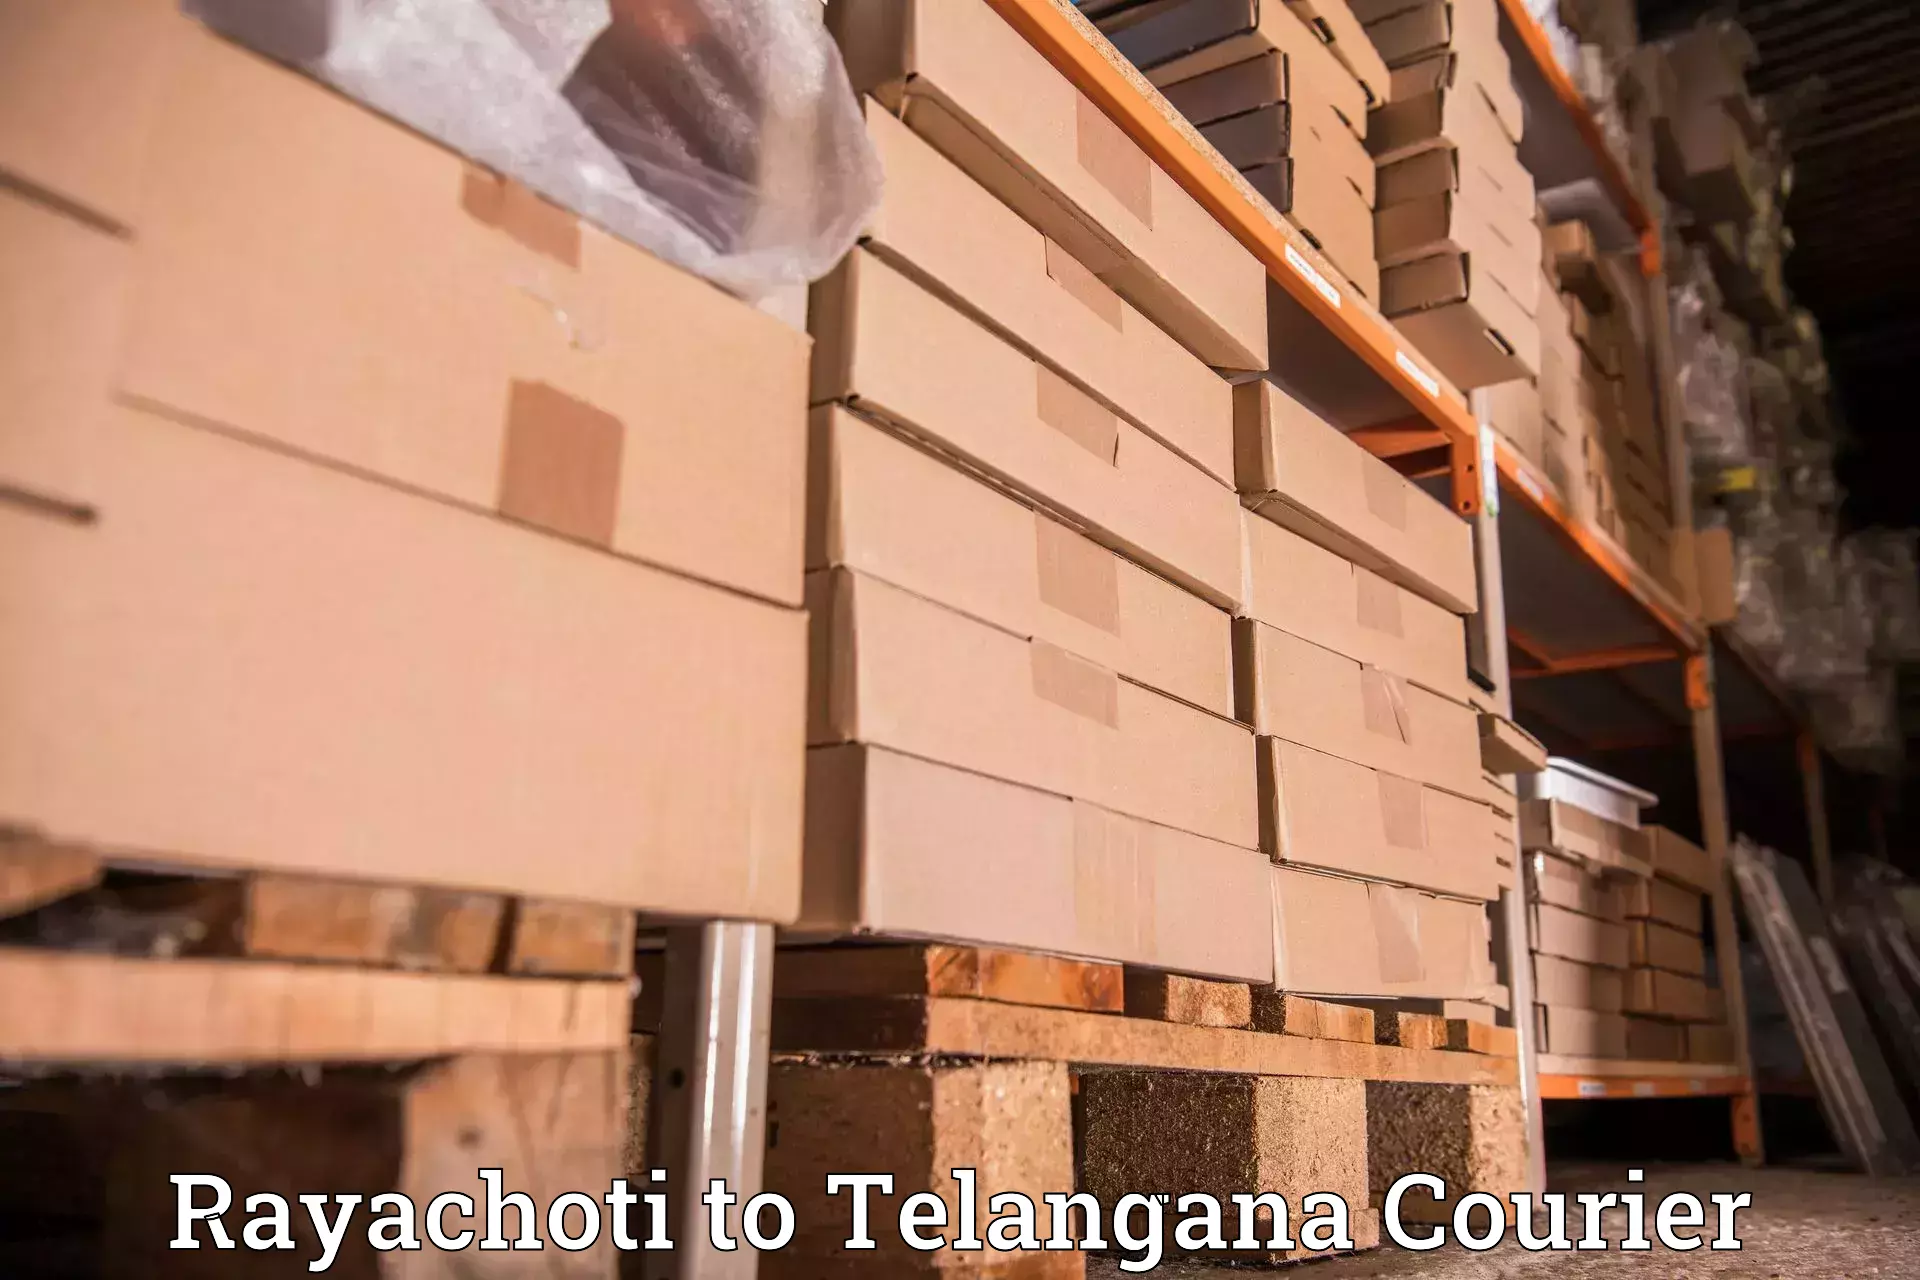 Residential courier service in Rayachoti to Netrang